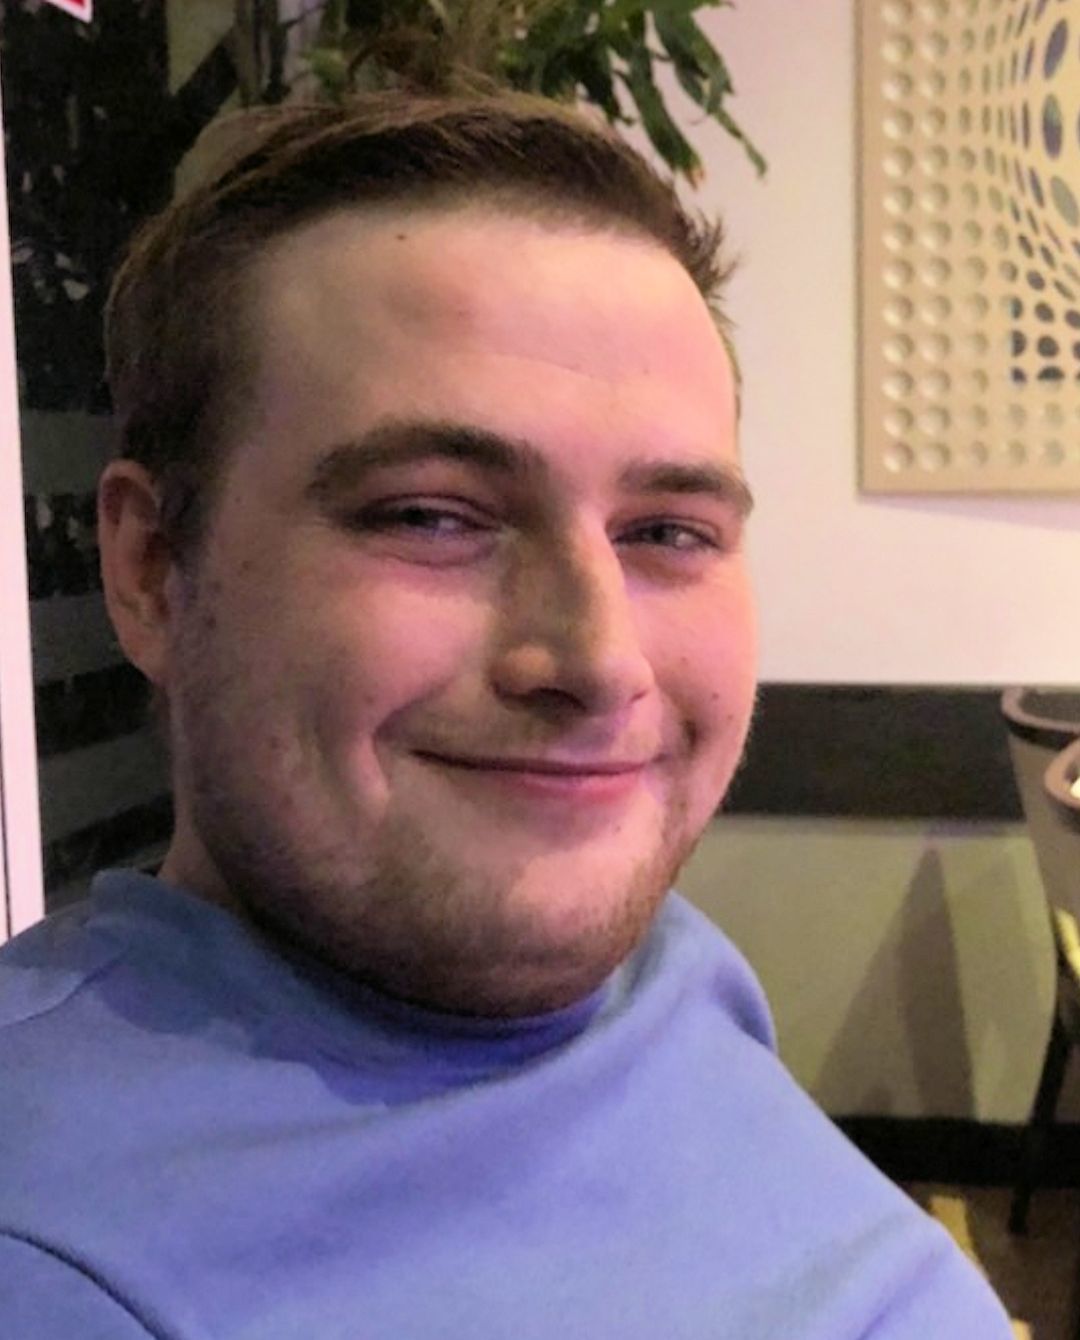 Police are continuing to search for missing man Tom Jennings from Portslade